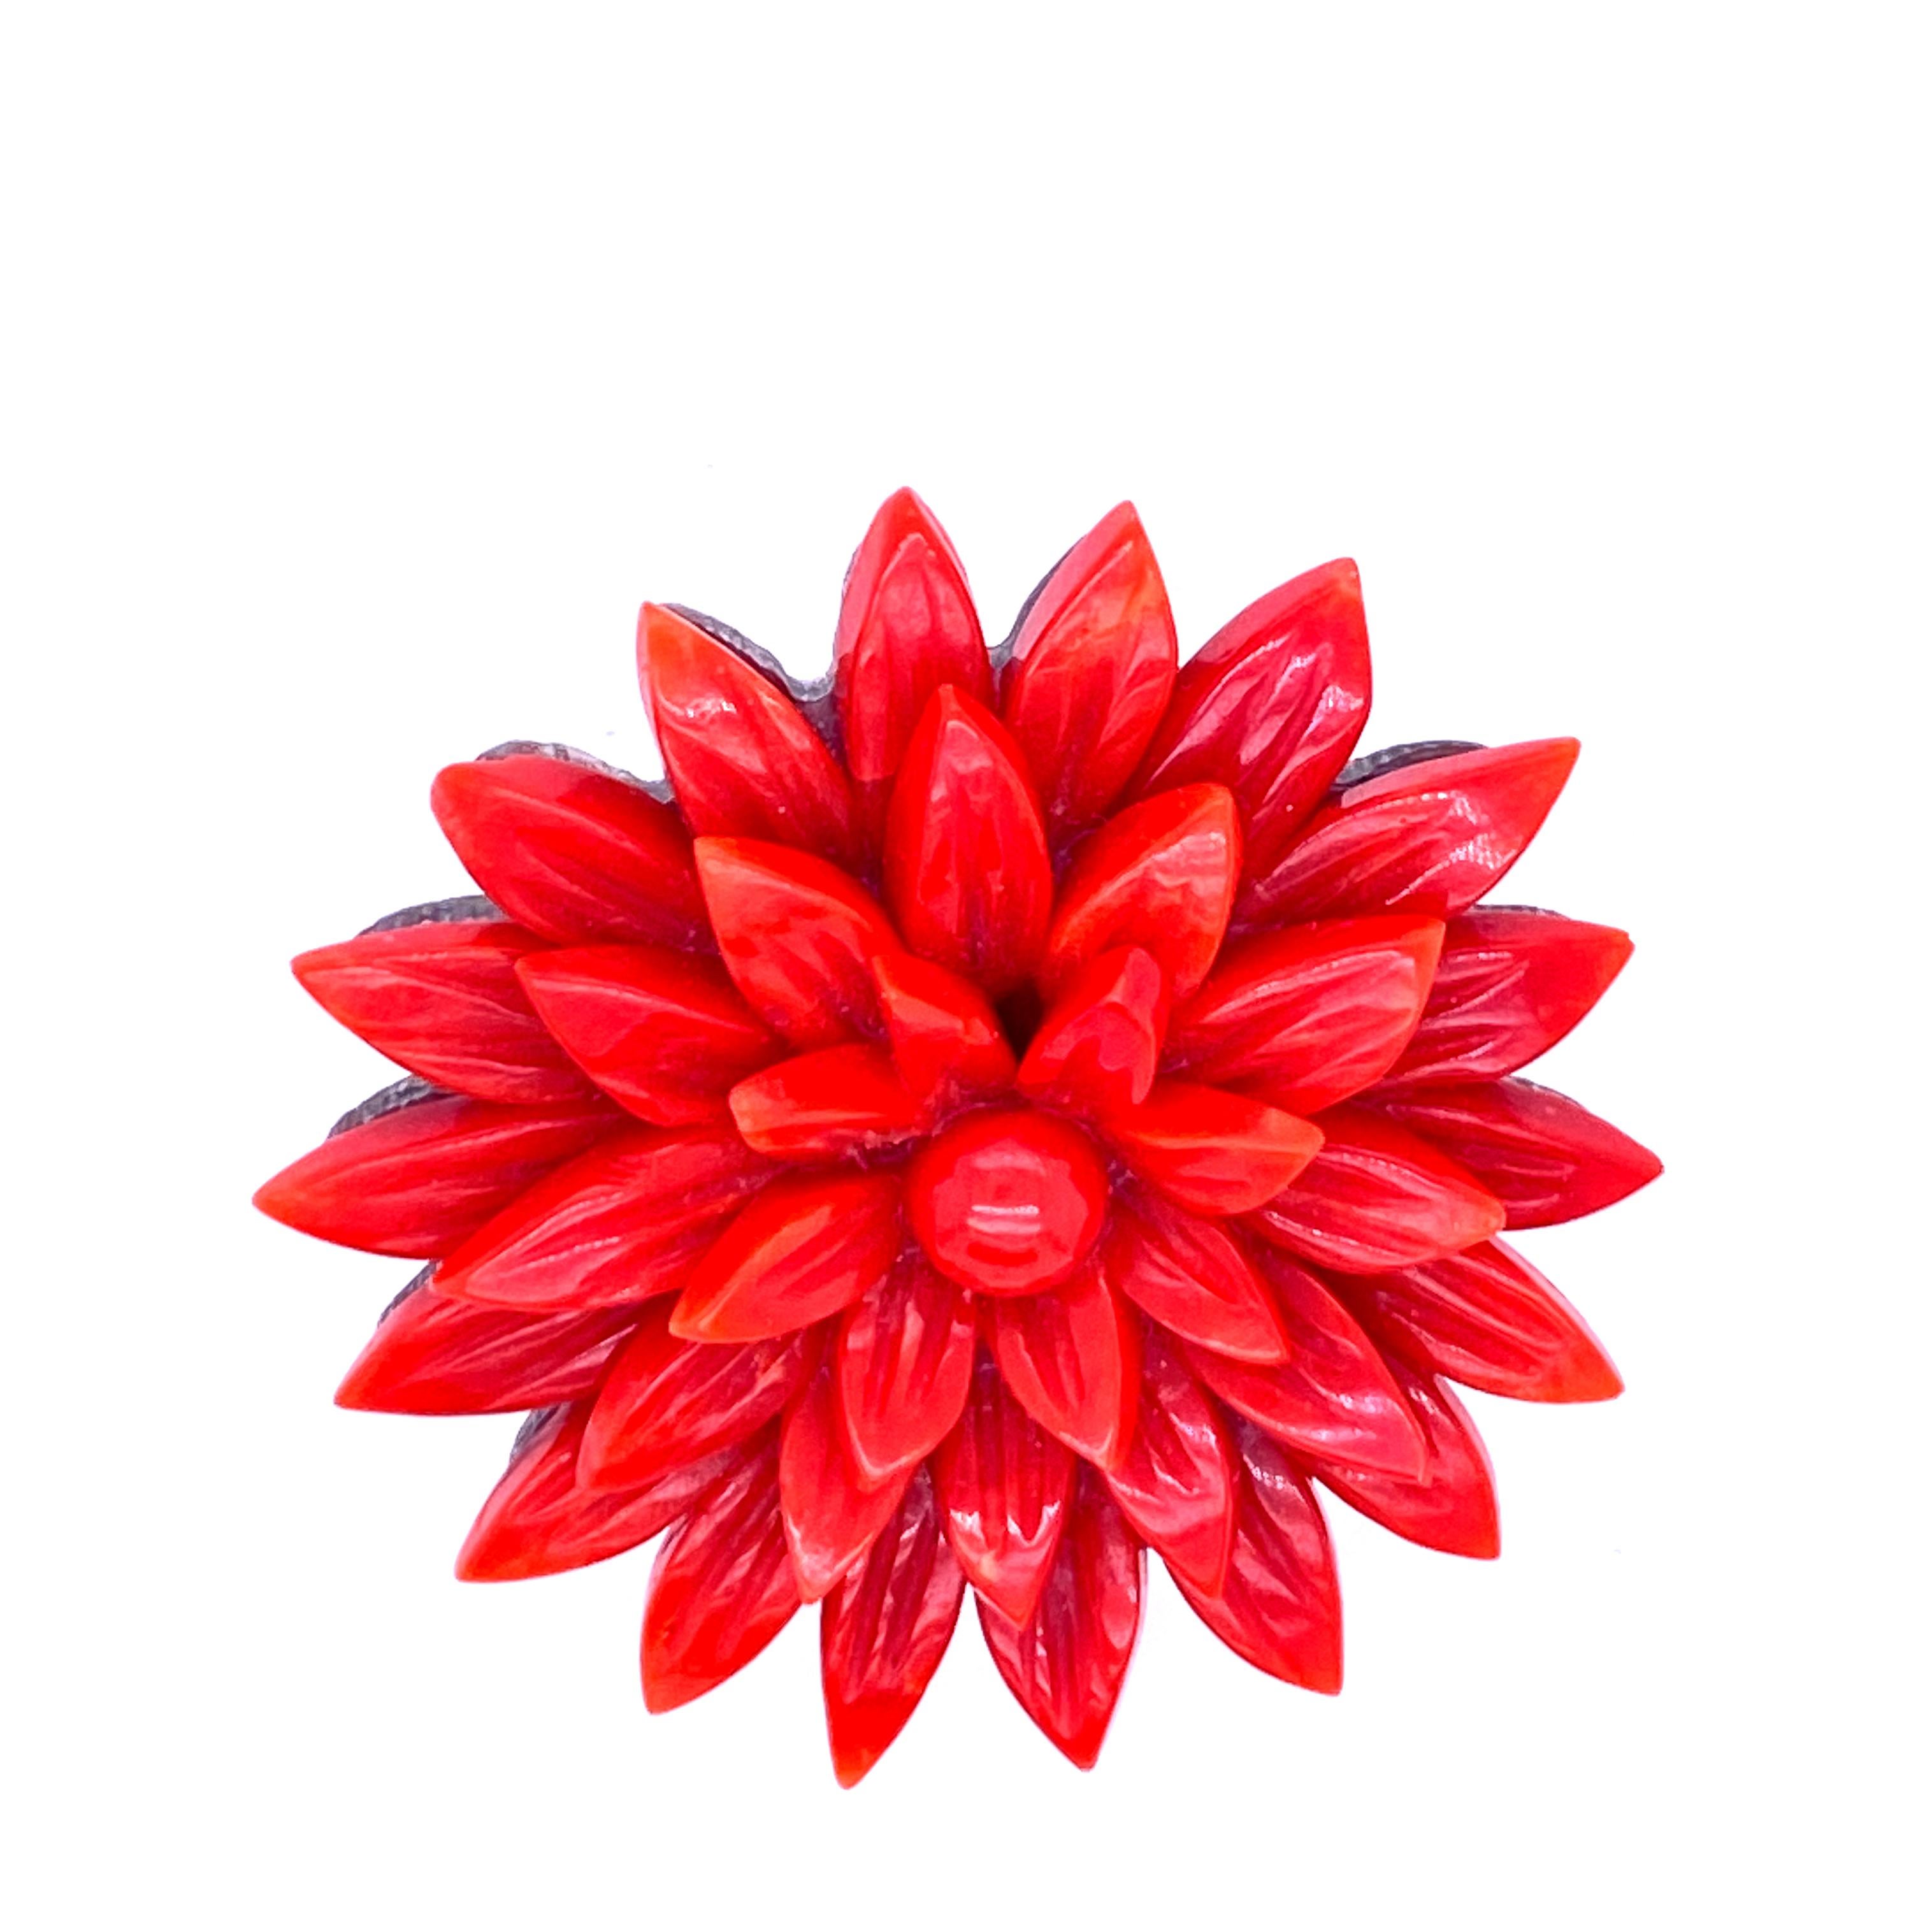 One Retro red coral flower pin measuring 1.5 inches with an abalone backing and yellow gold filled clasp.  